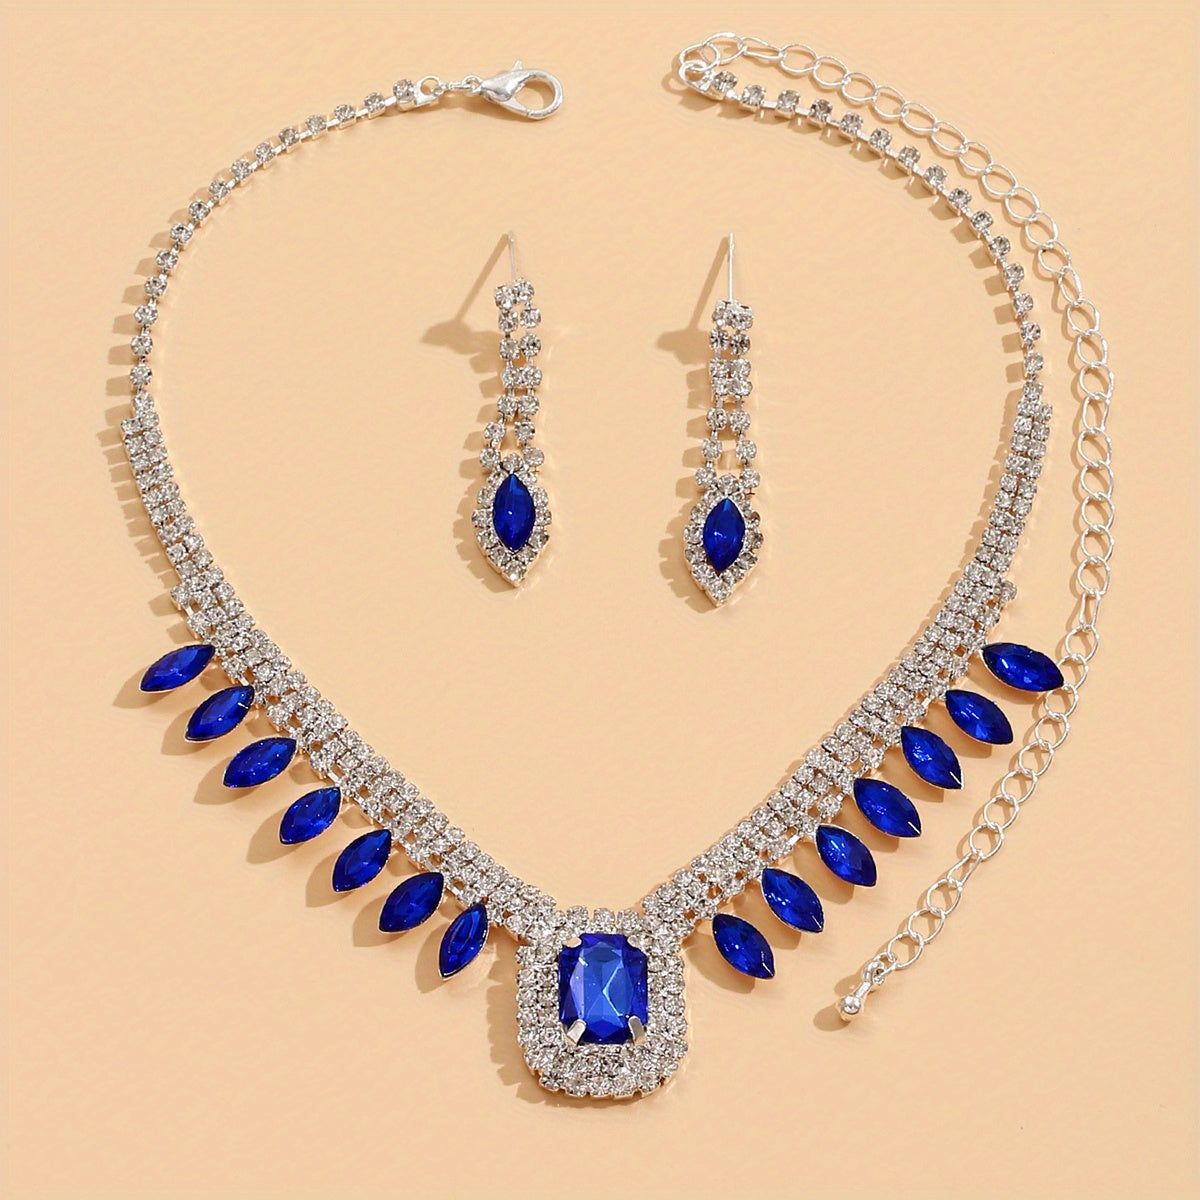 Elegant Vintage Bridal Jewelry Set - Pendant Necklace and Dangle Earrings for Banquet Dress Accessories